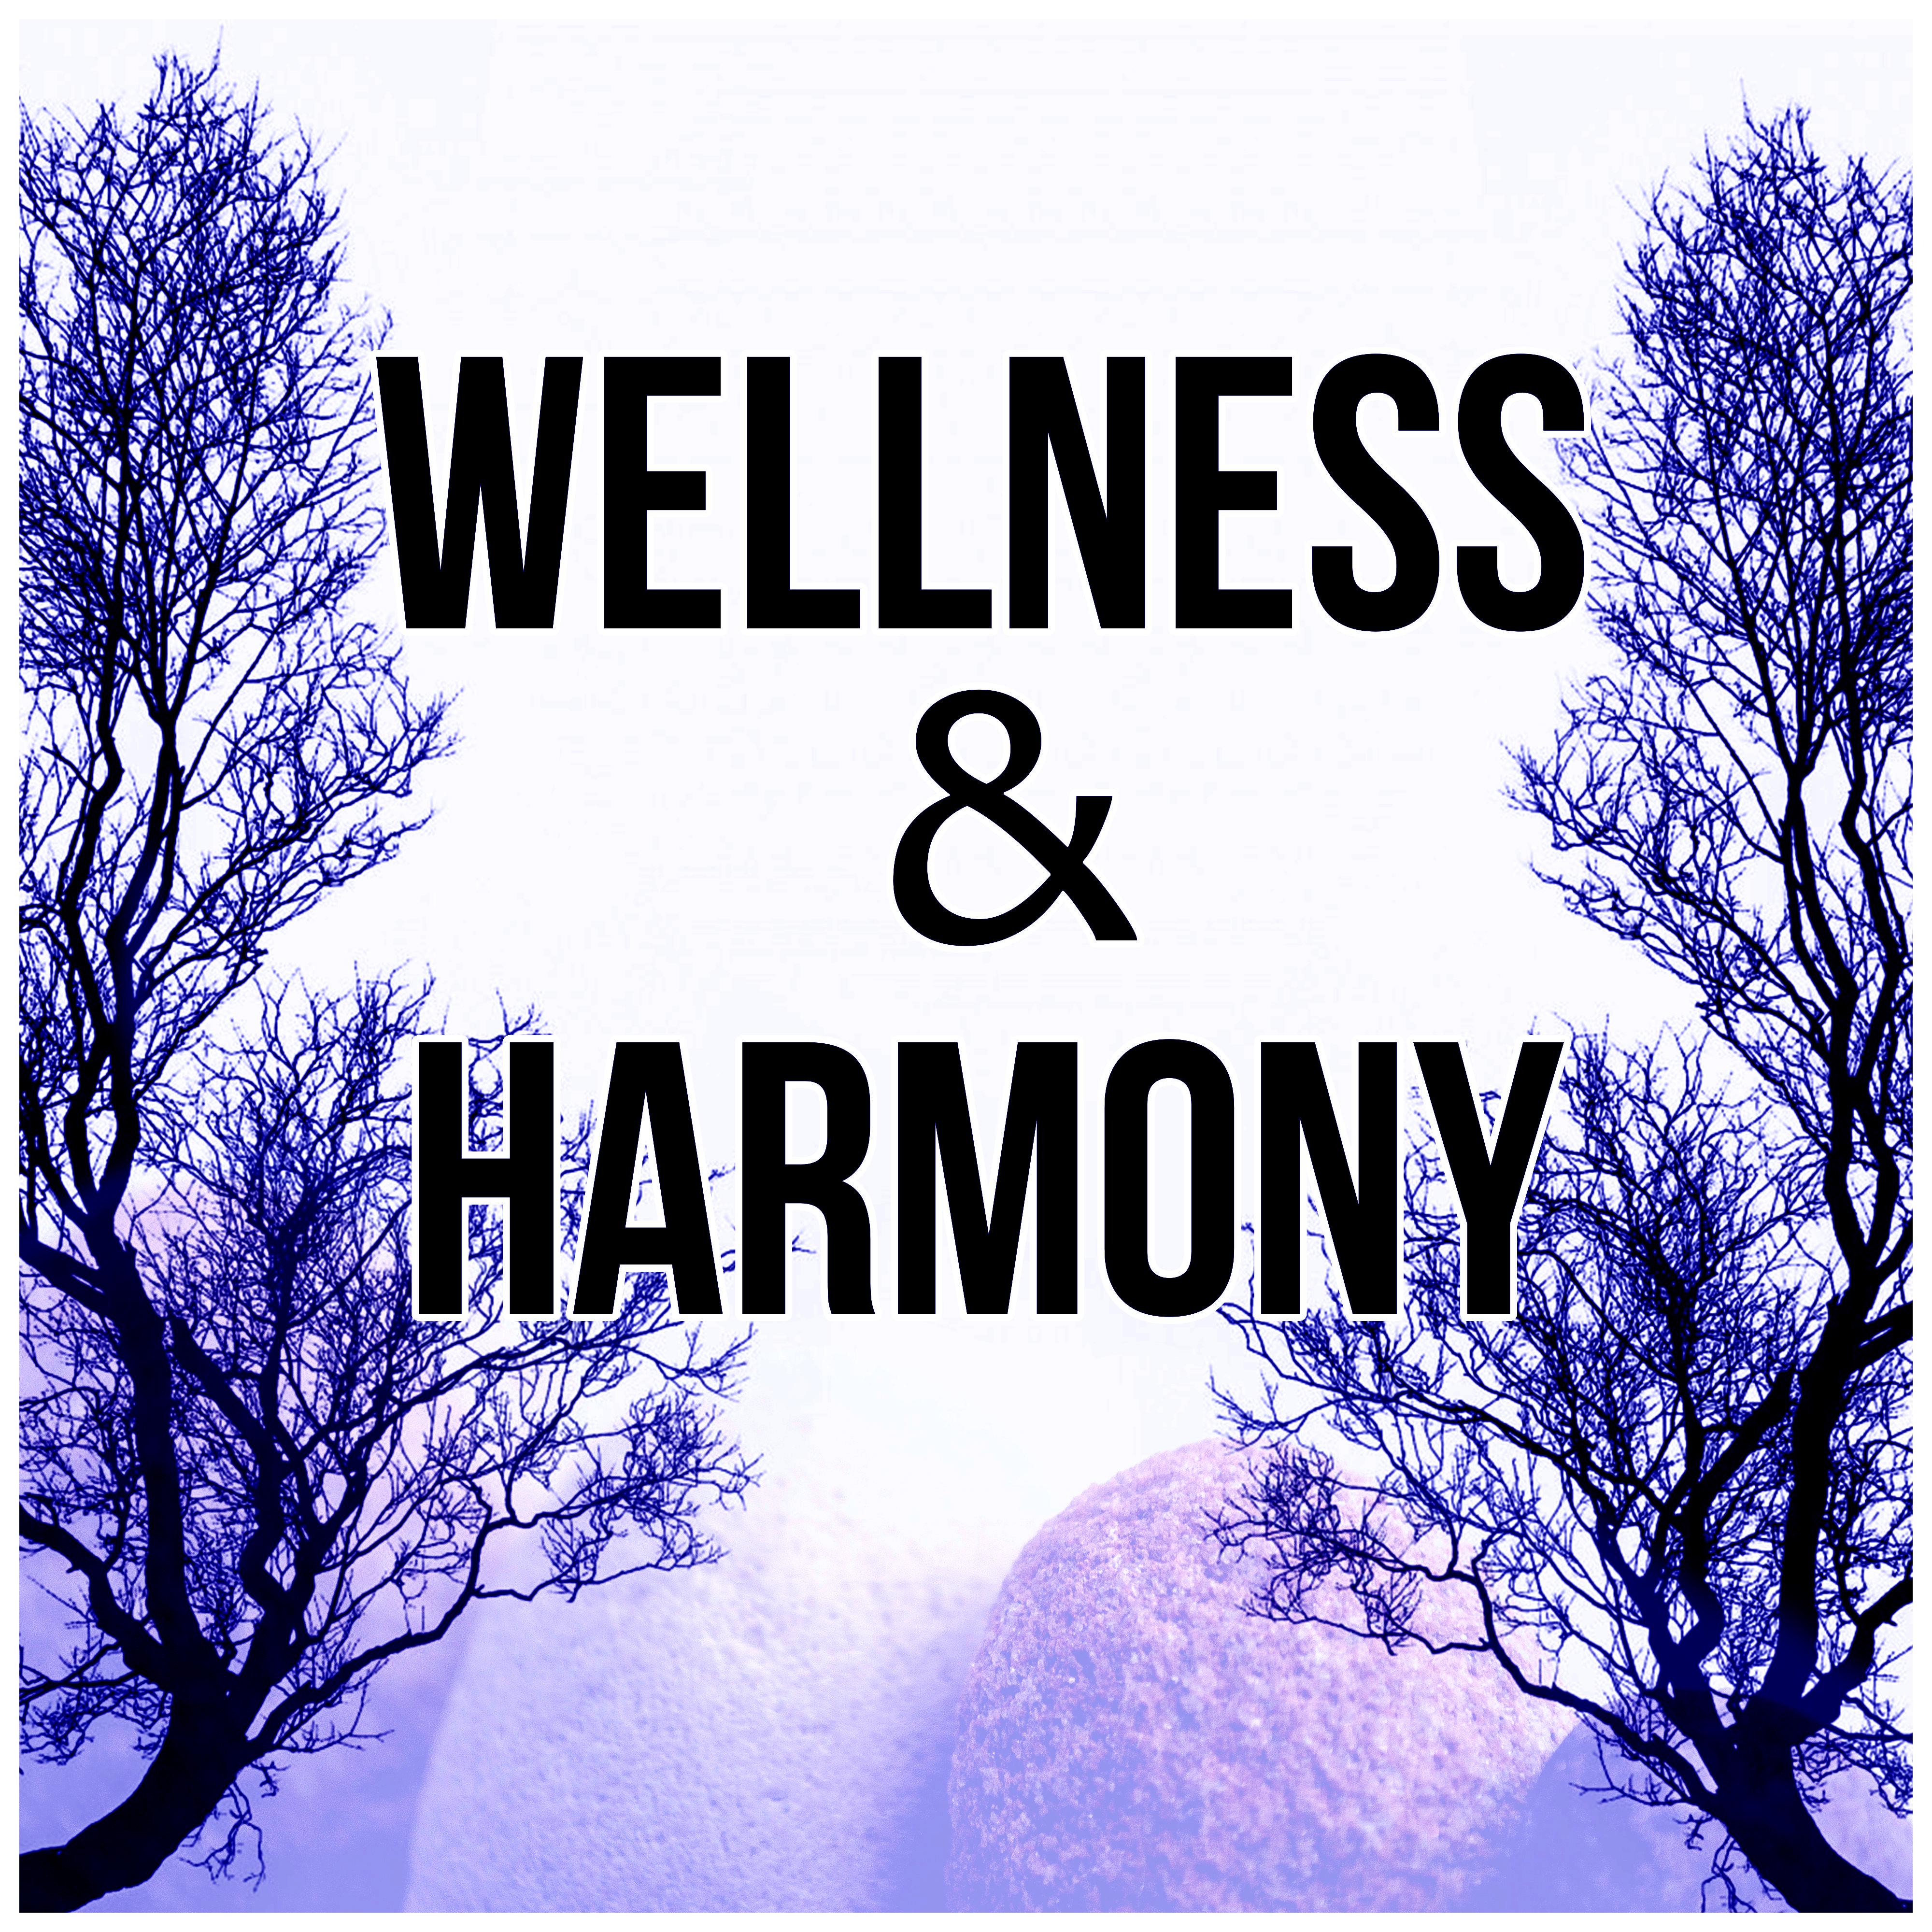 Wellness & Harmony - Music and Pure Nature Sounds for Stress Relief, Harmony of Senses, Relaxing Background Music for Spa the Wellness Center, Sensual Massage Music for Aromatherapy